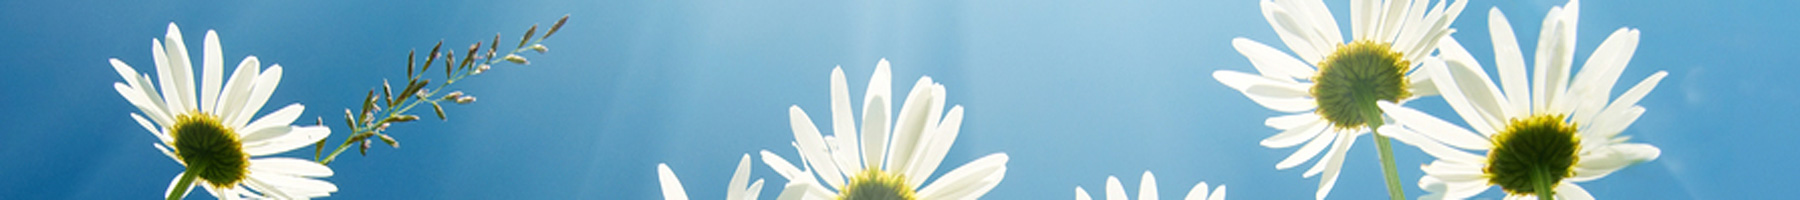 Four white daisies stretch toward a blue sky with light streaming down.